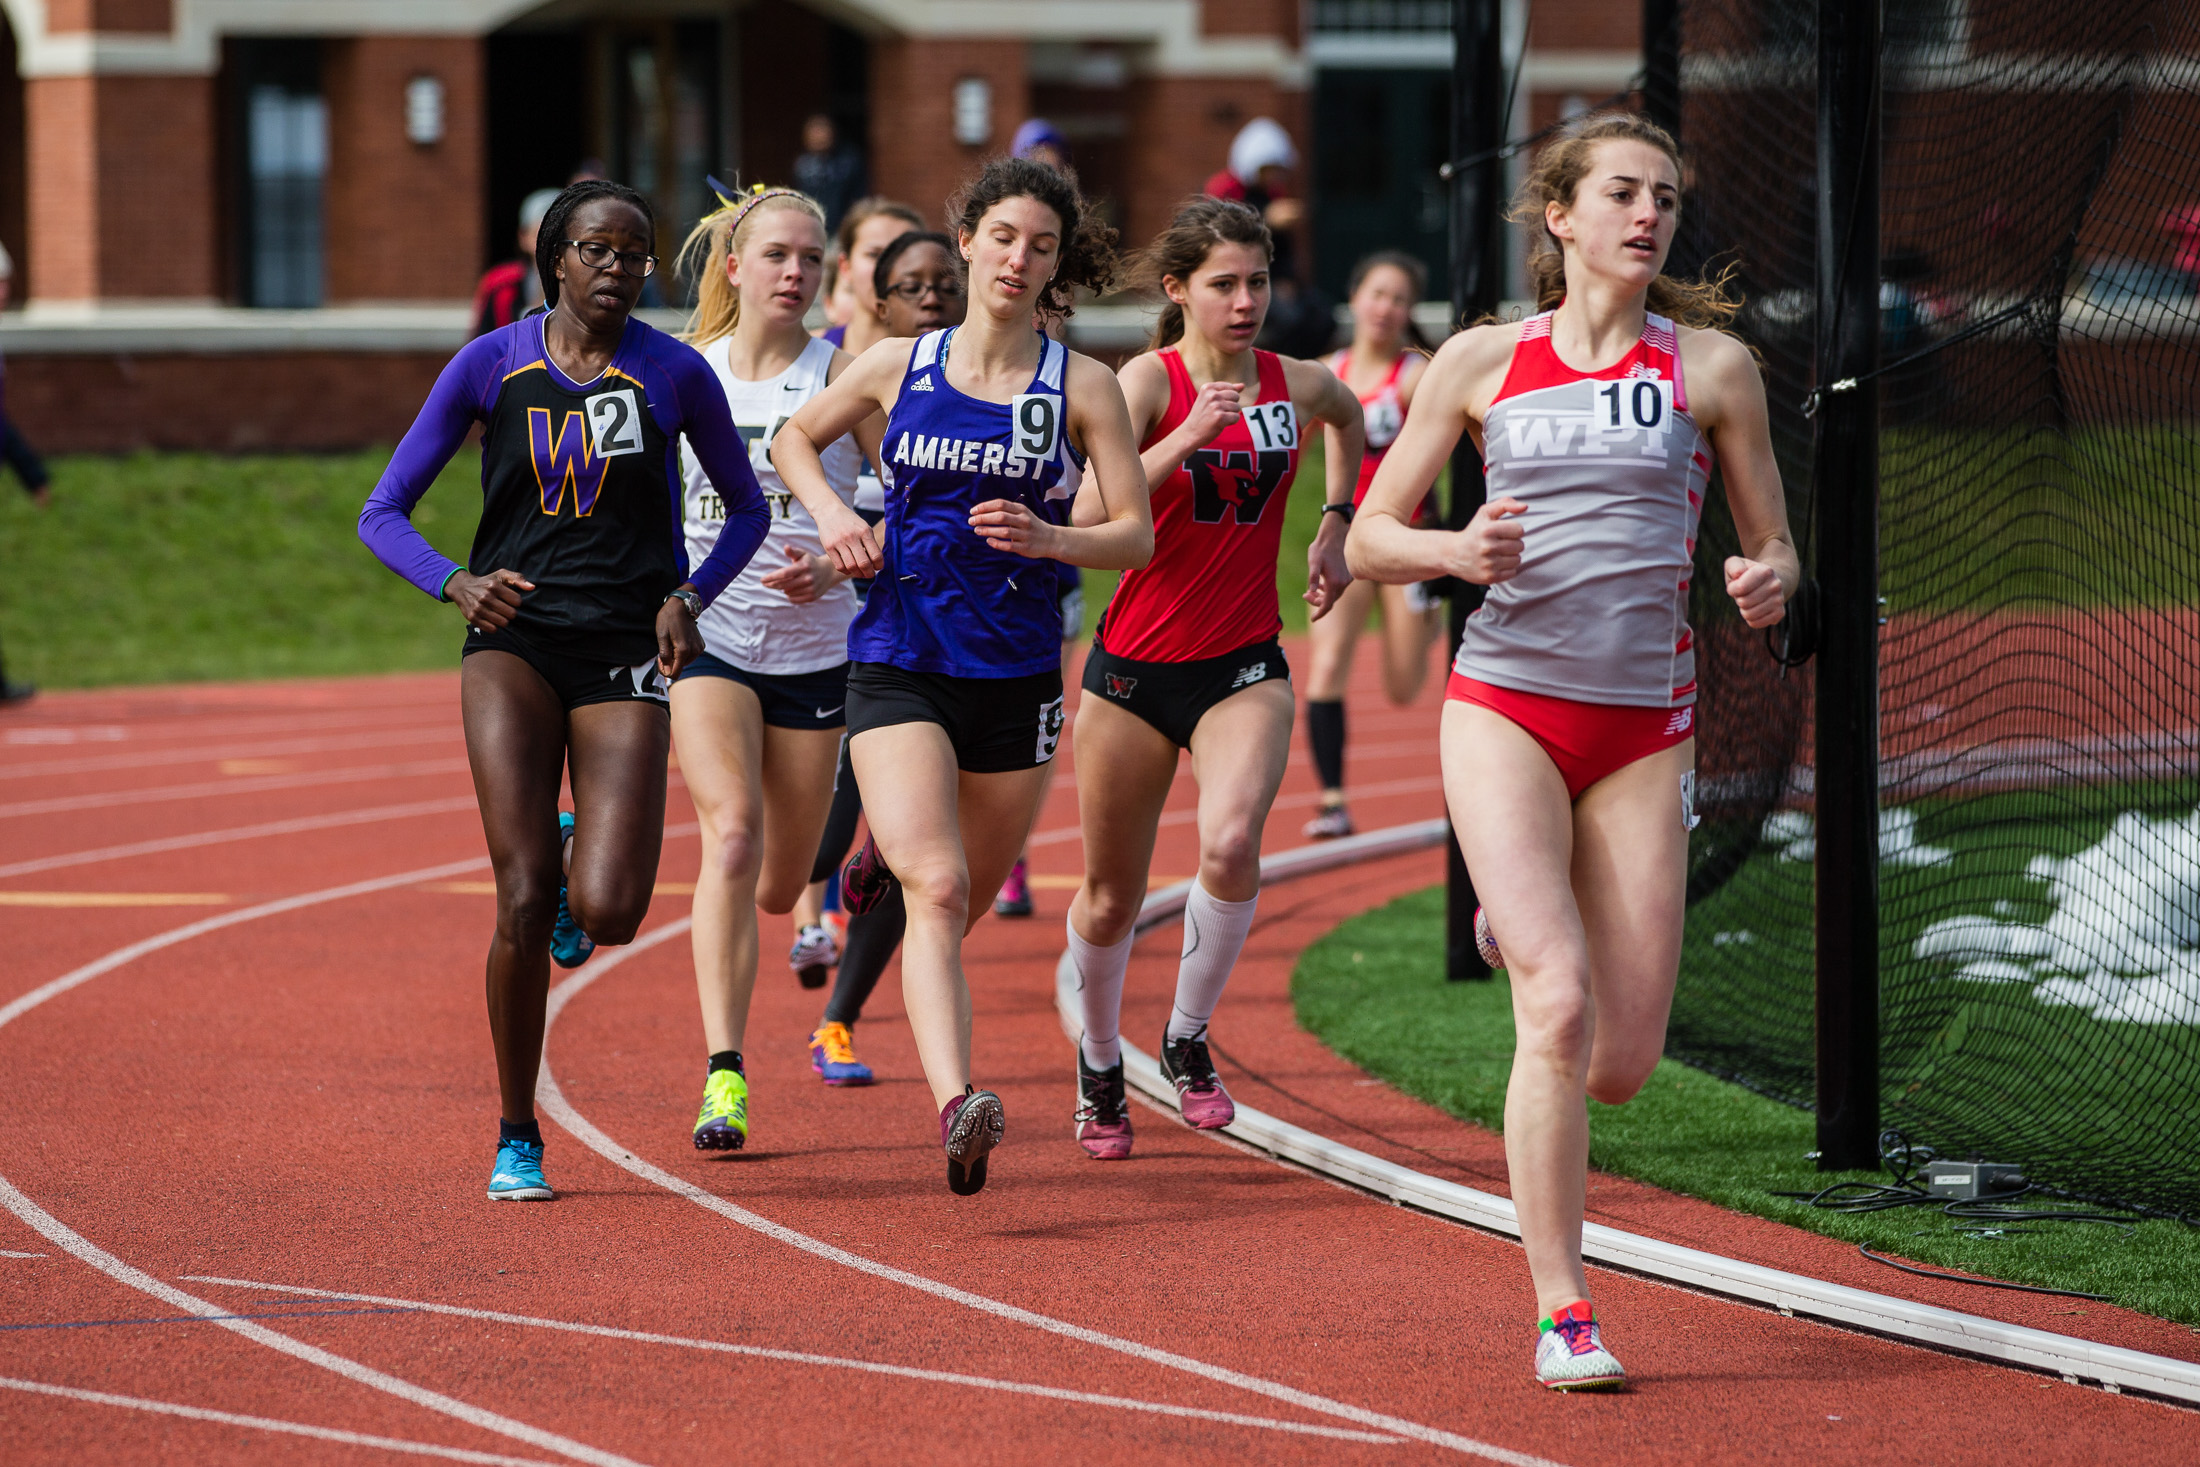 Women’s Track and Field Wins Four Events at Tufts Spring Fling Home